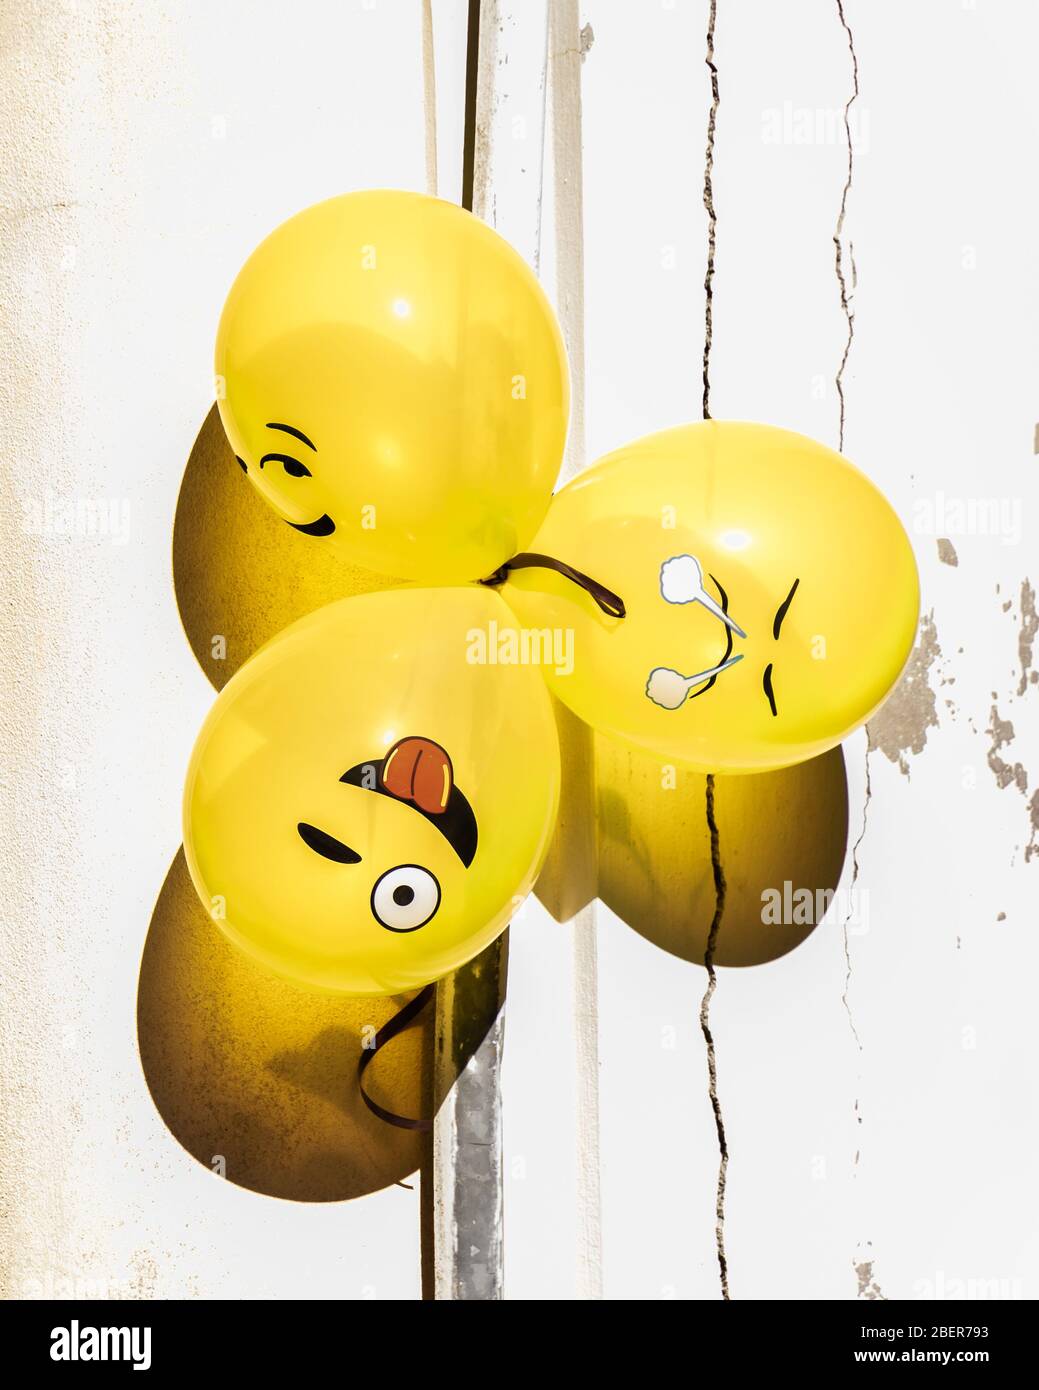 Fun, yellow emoji balloons bunched together in the sun for a street party in Senigallia, Le Marche, Italy Stock Photo